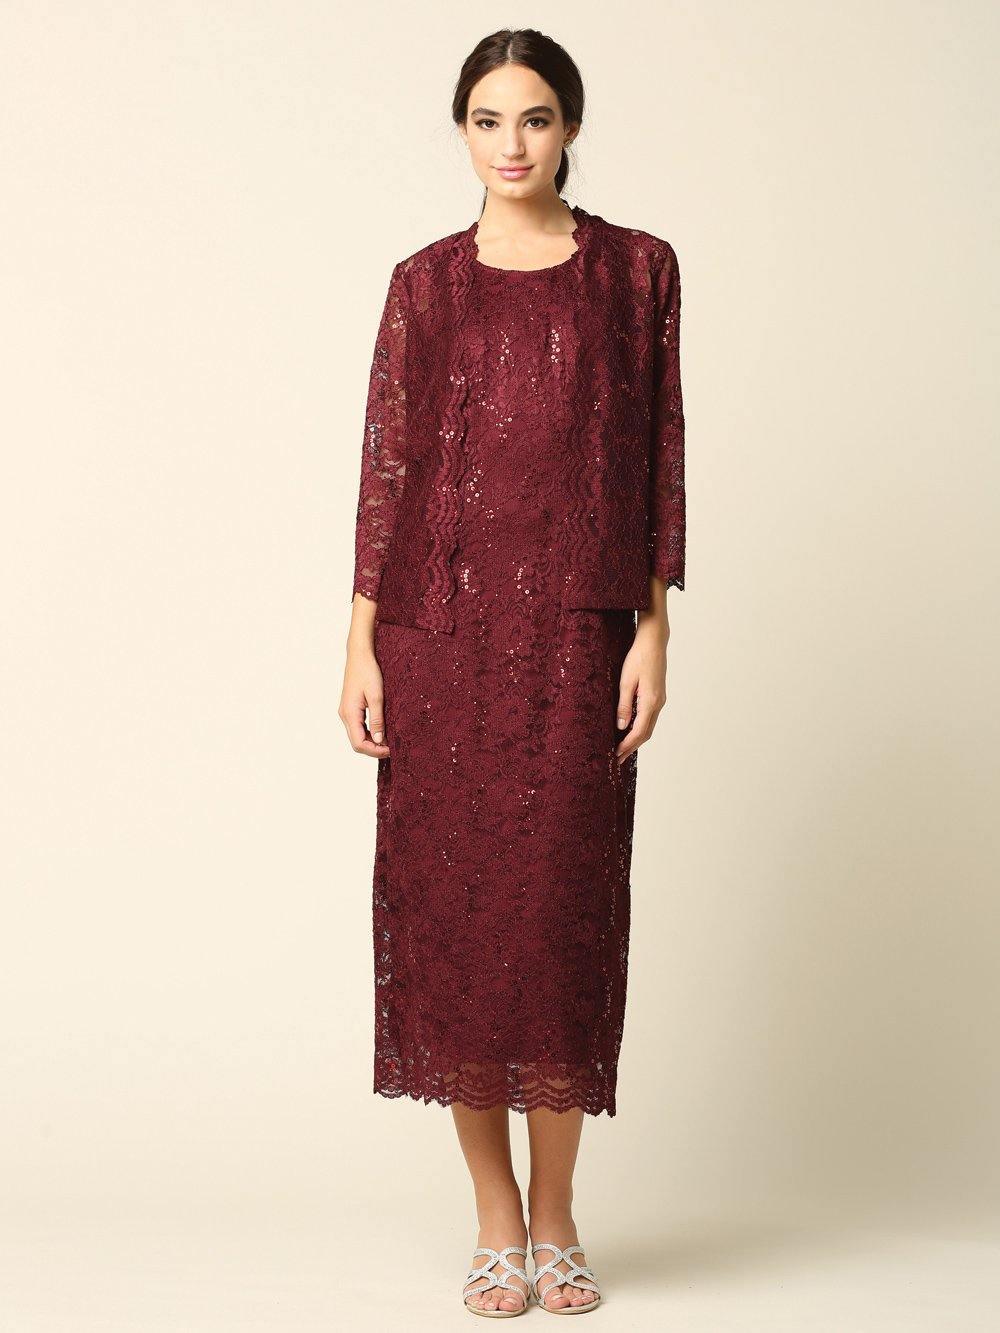 Royal Mother of the Bride Formal Lace Jacket Dress Sale for $29.99 ...